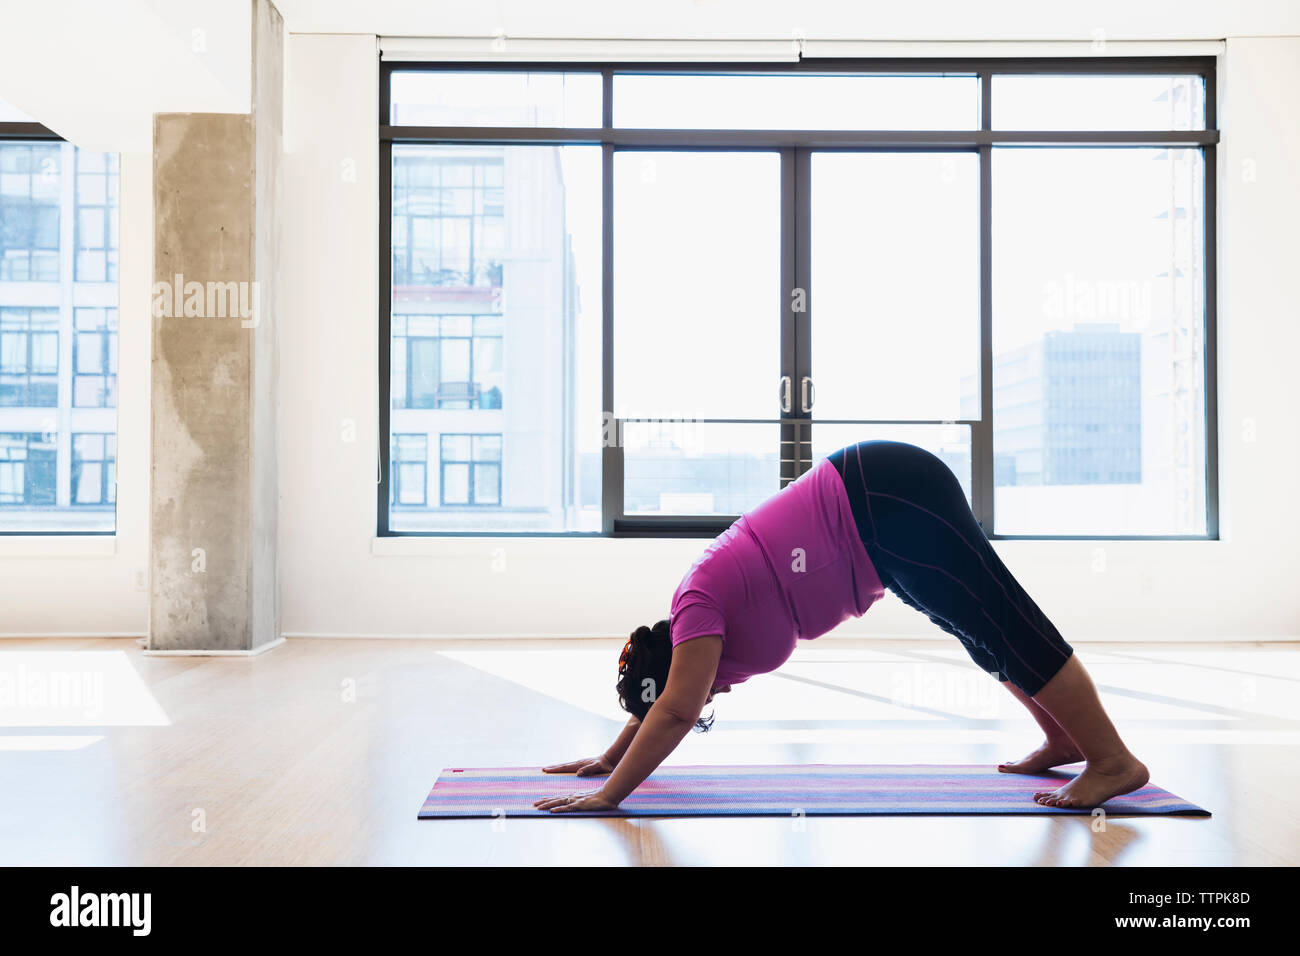 Side view of woman practicing downward facing dog position yoga against window Stock Photo